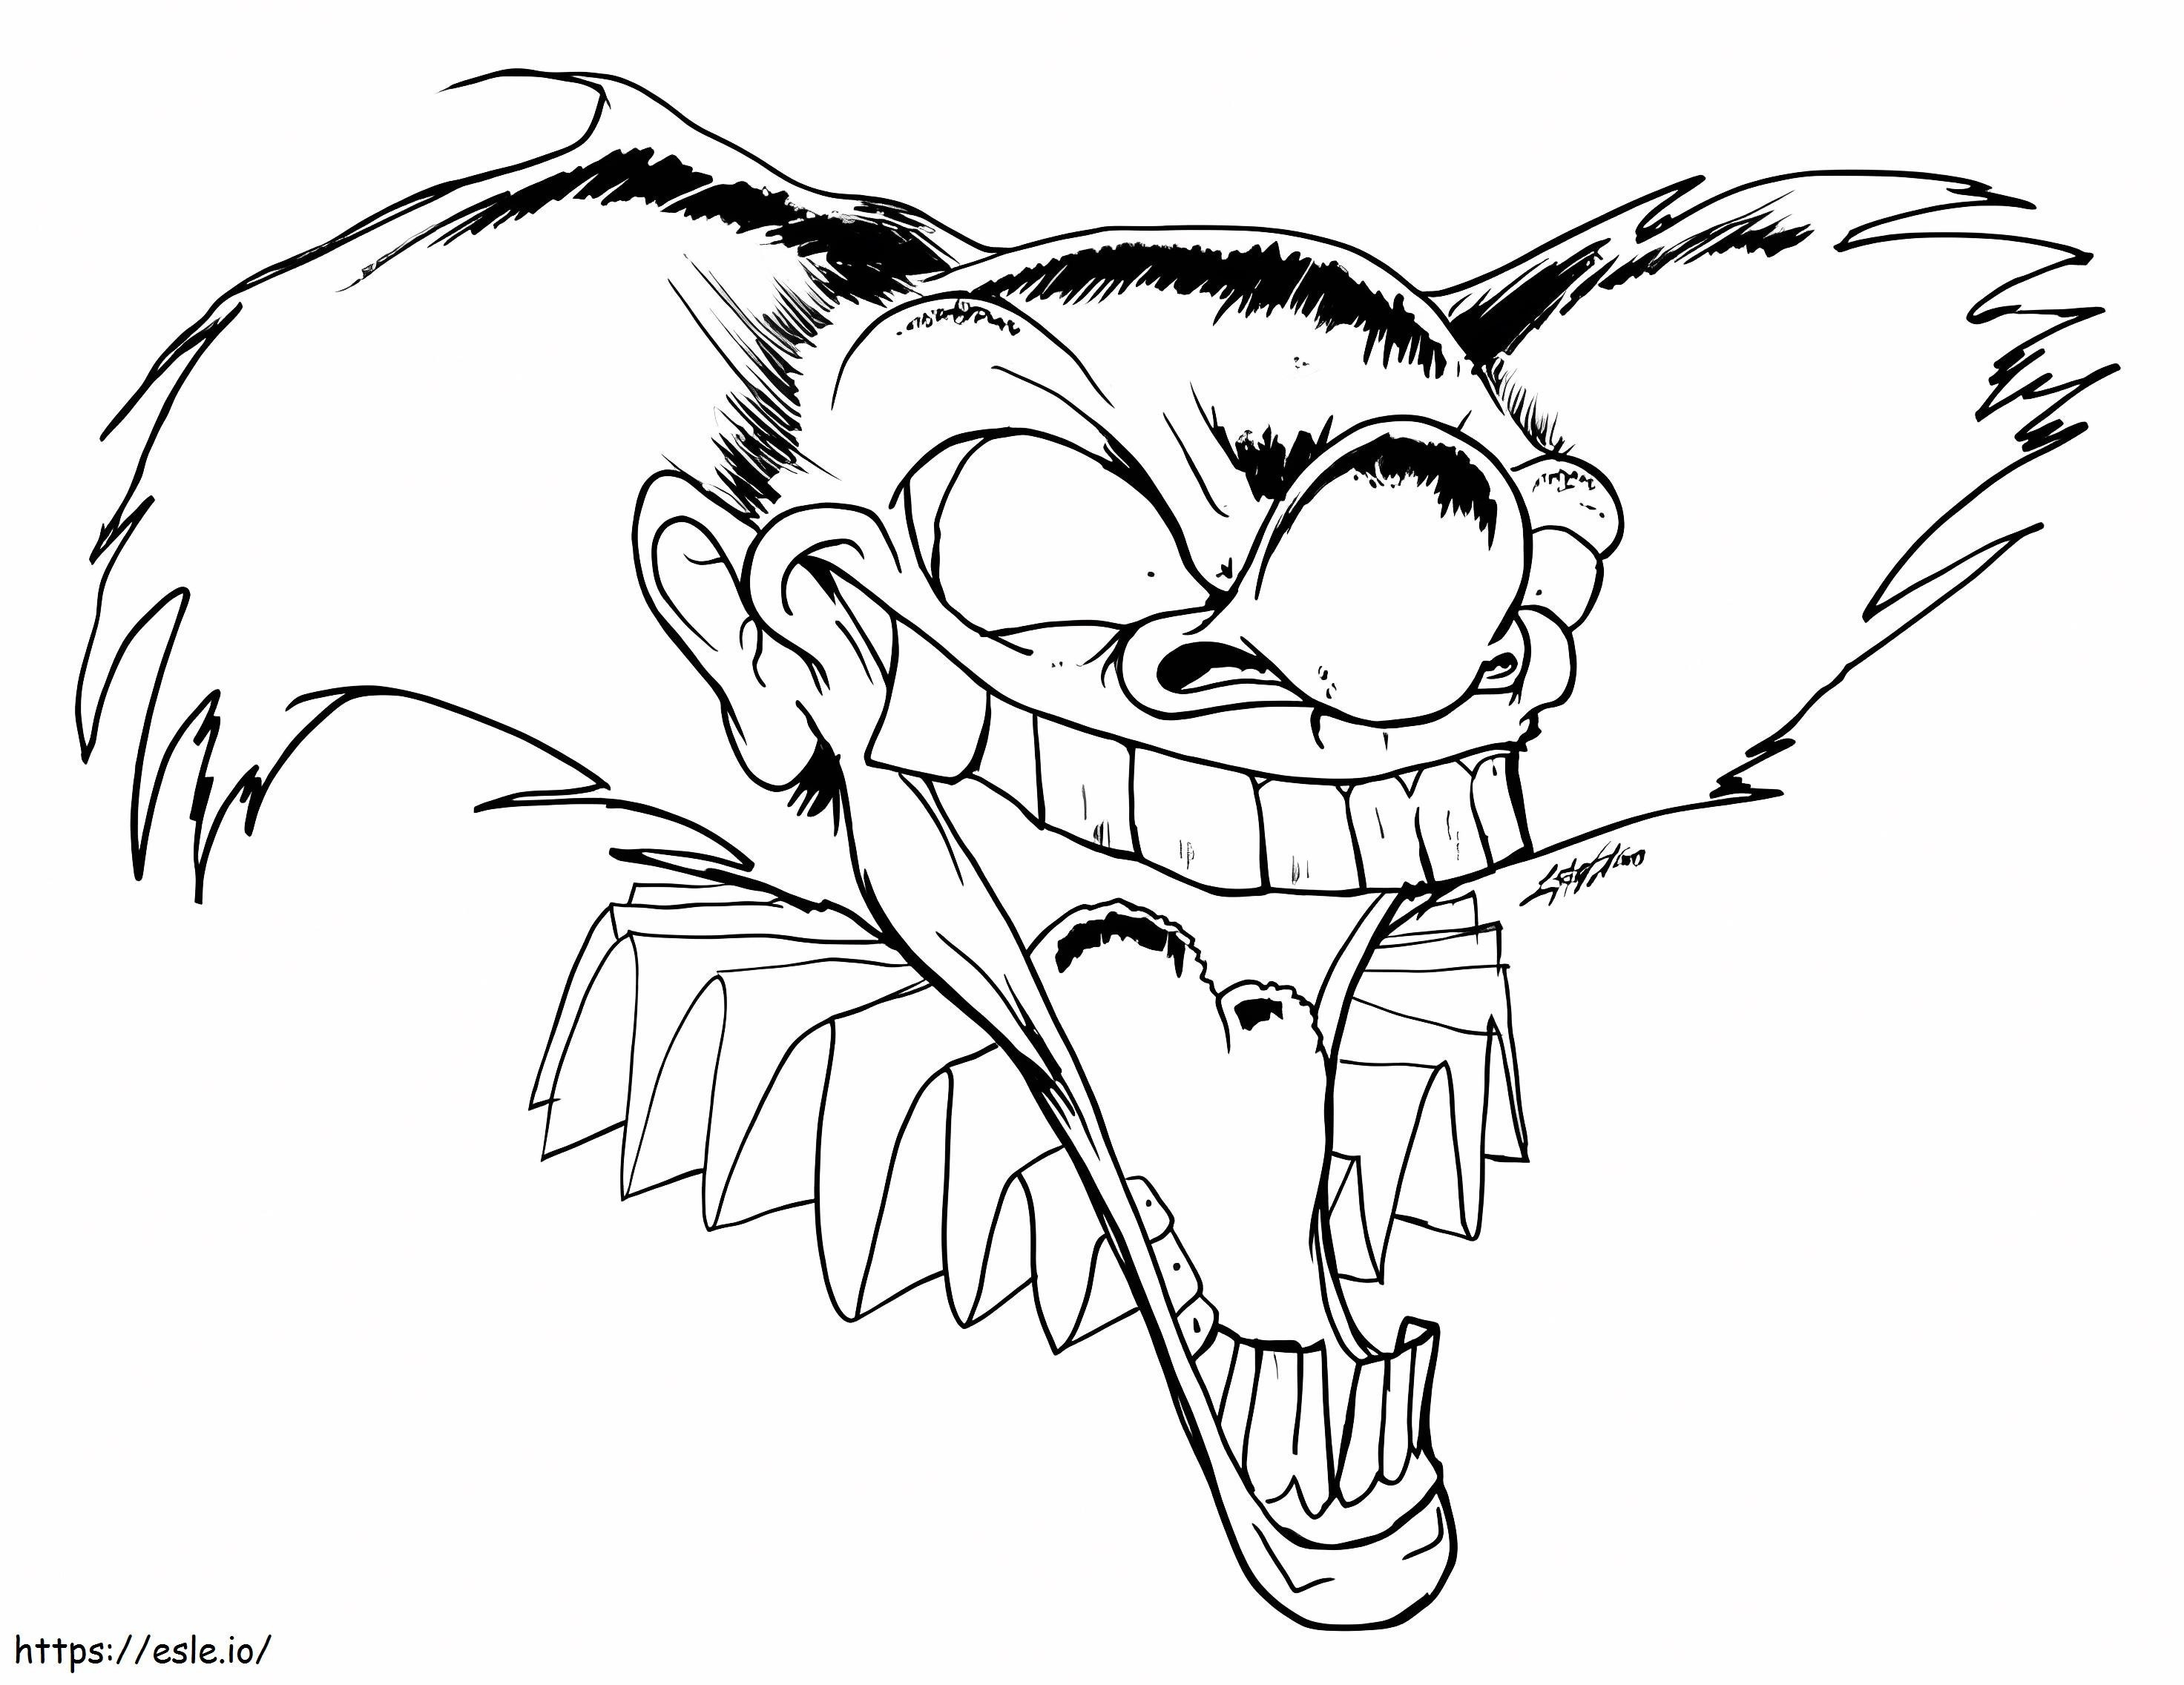 Scary Clown Horror coloring page